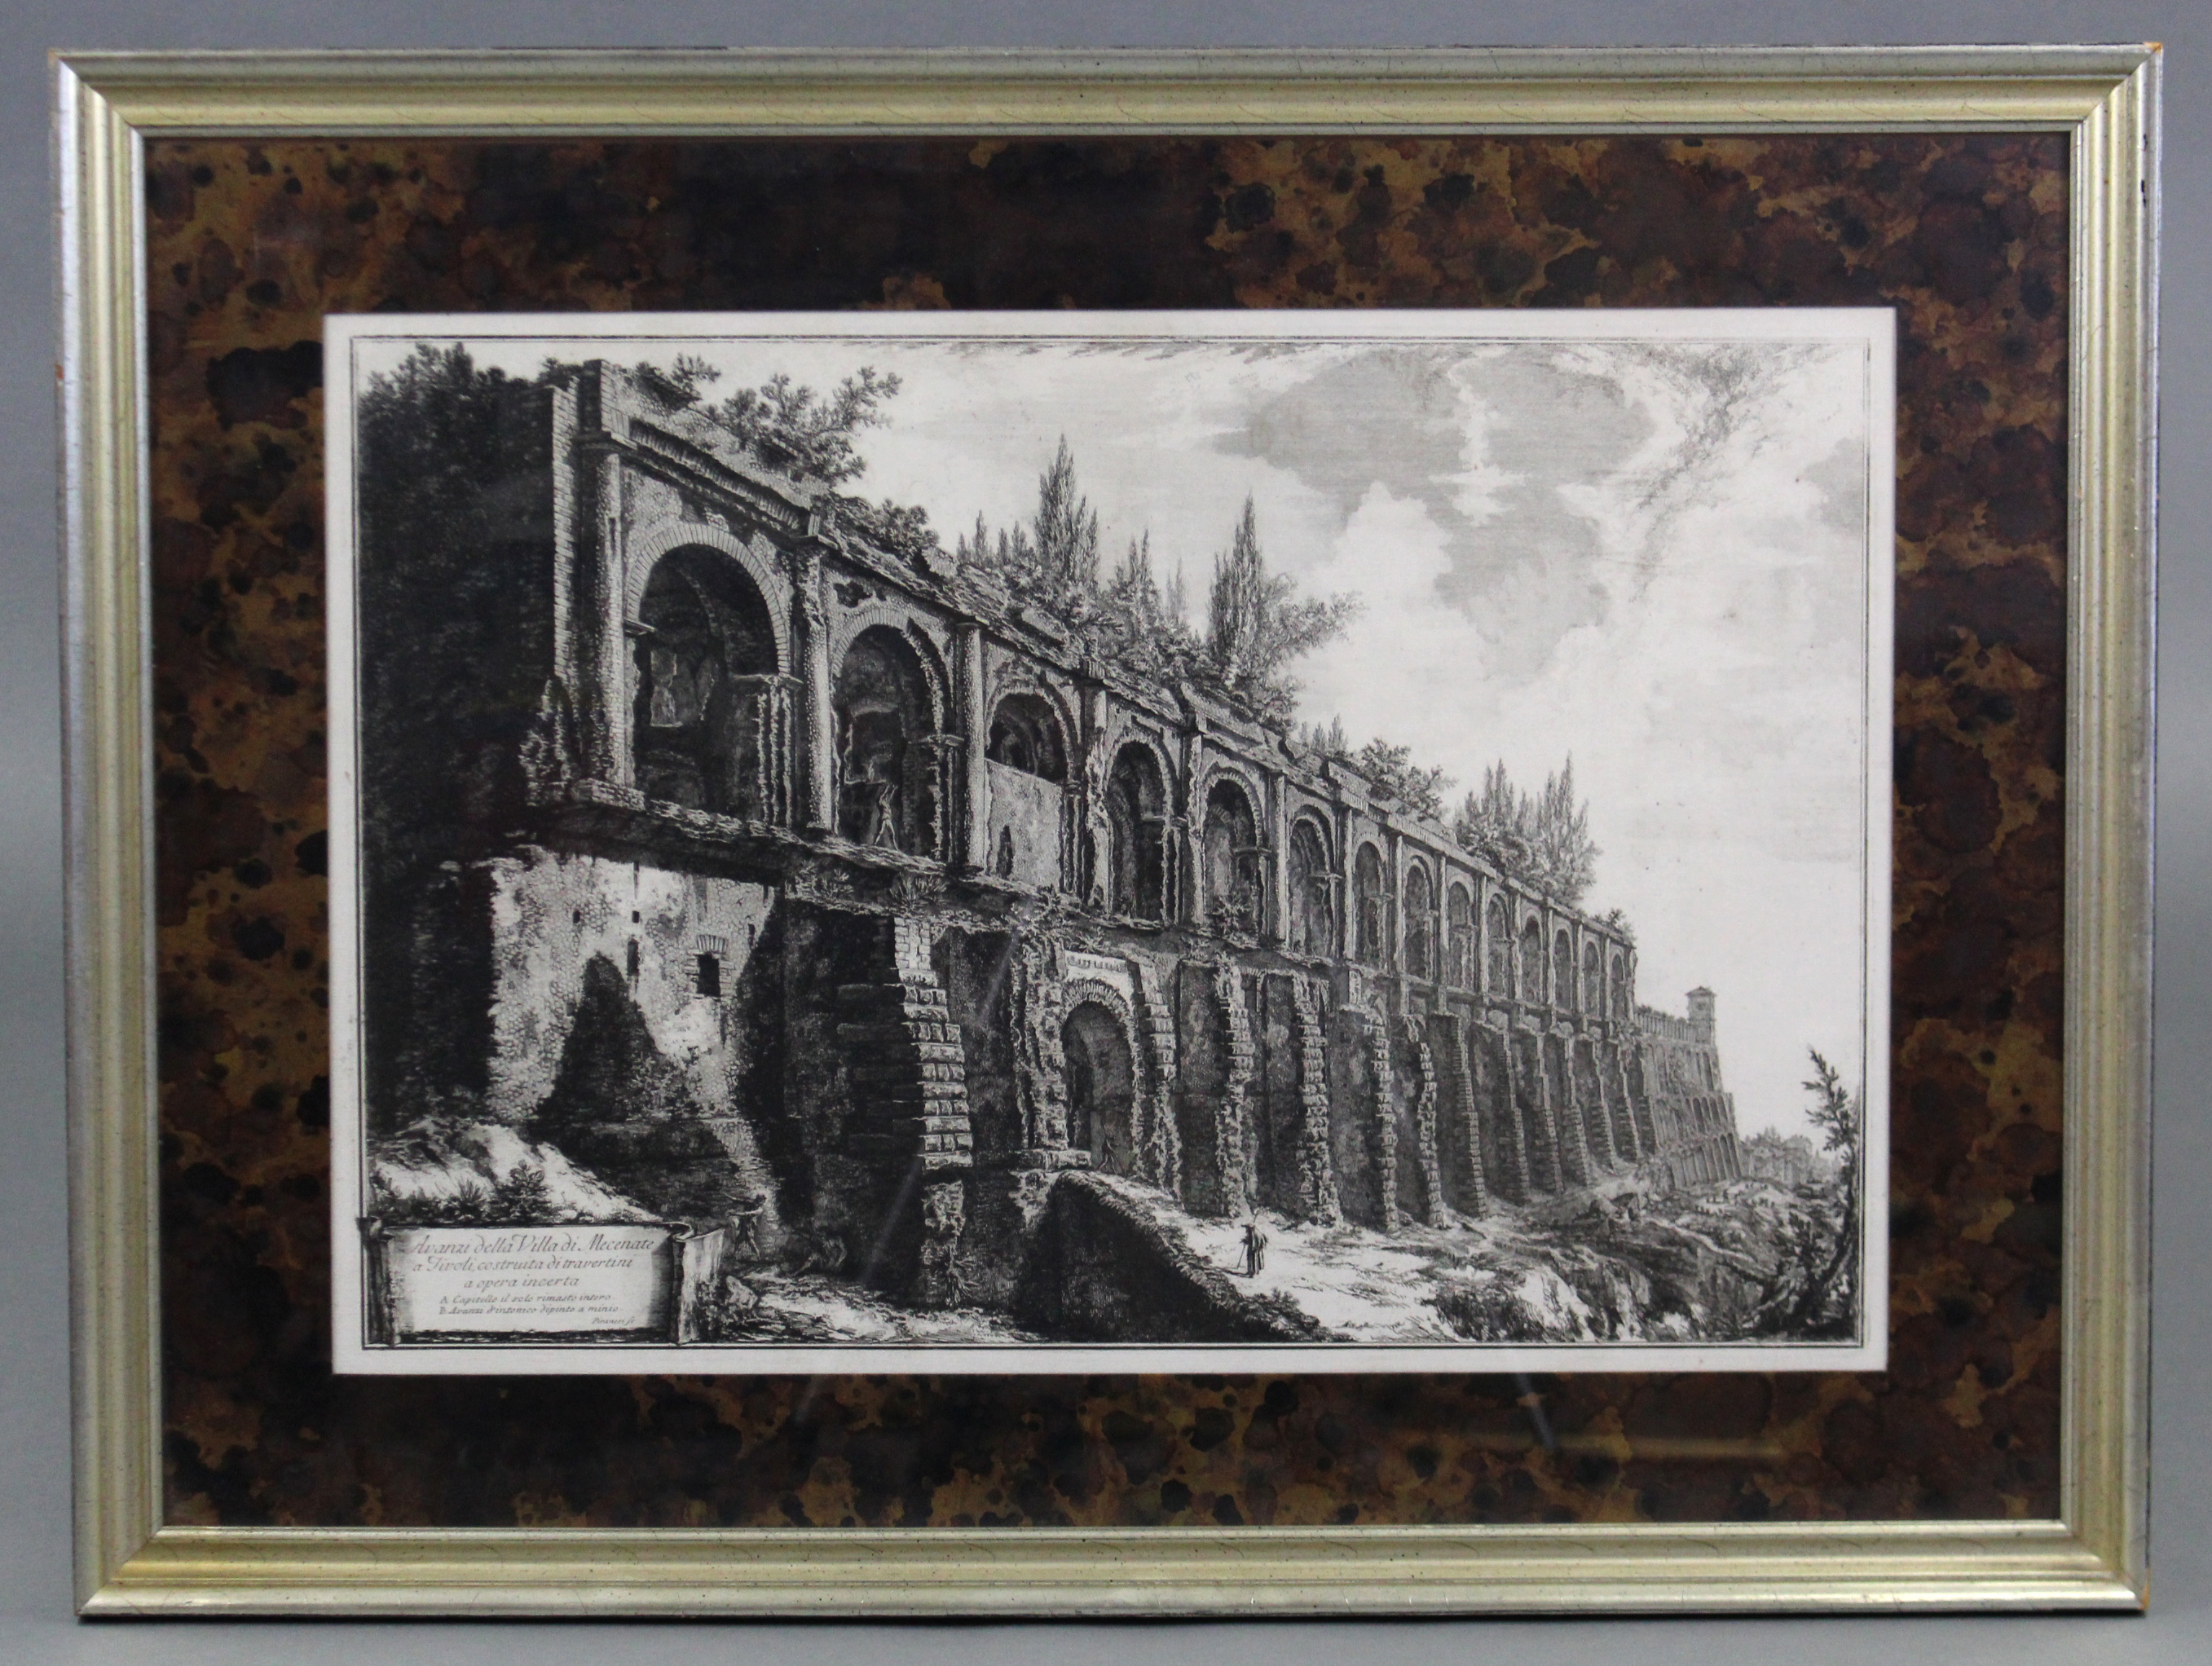 A pair of 18th century black-&-white engravings after GIOVANI BATTISTA PIRANESI (1720-1778), titled: